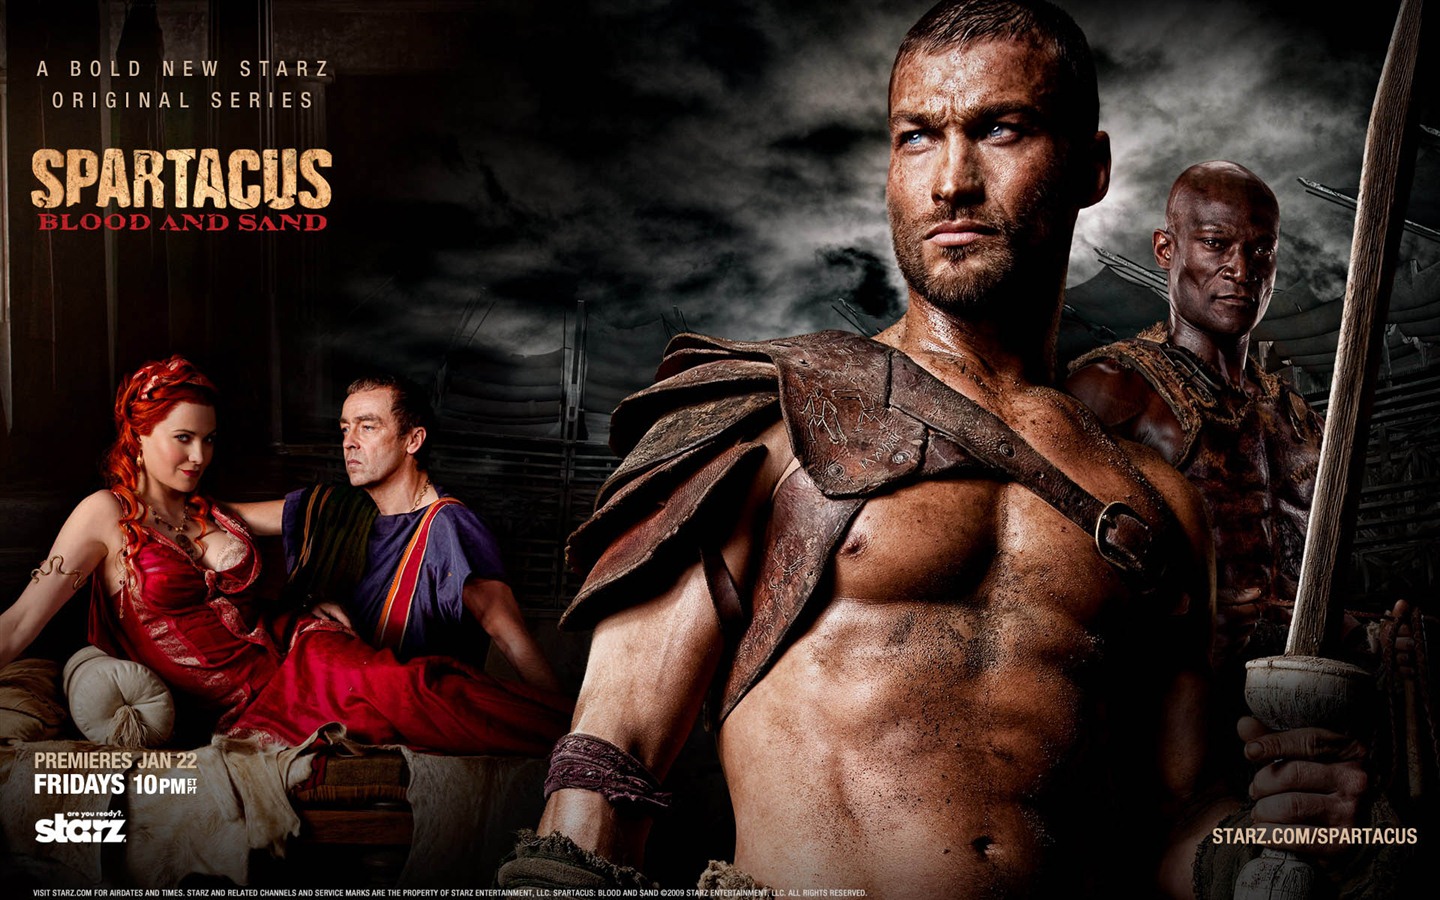 Spartacus: Blood and Sand HD Wallpaper #7 - 1440x900